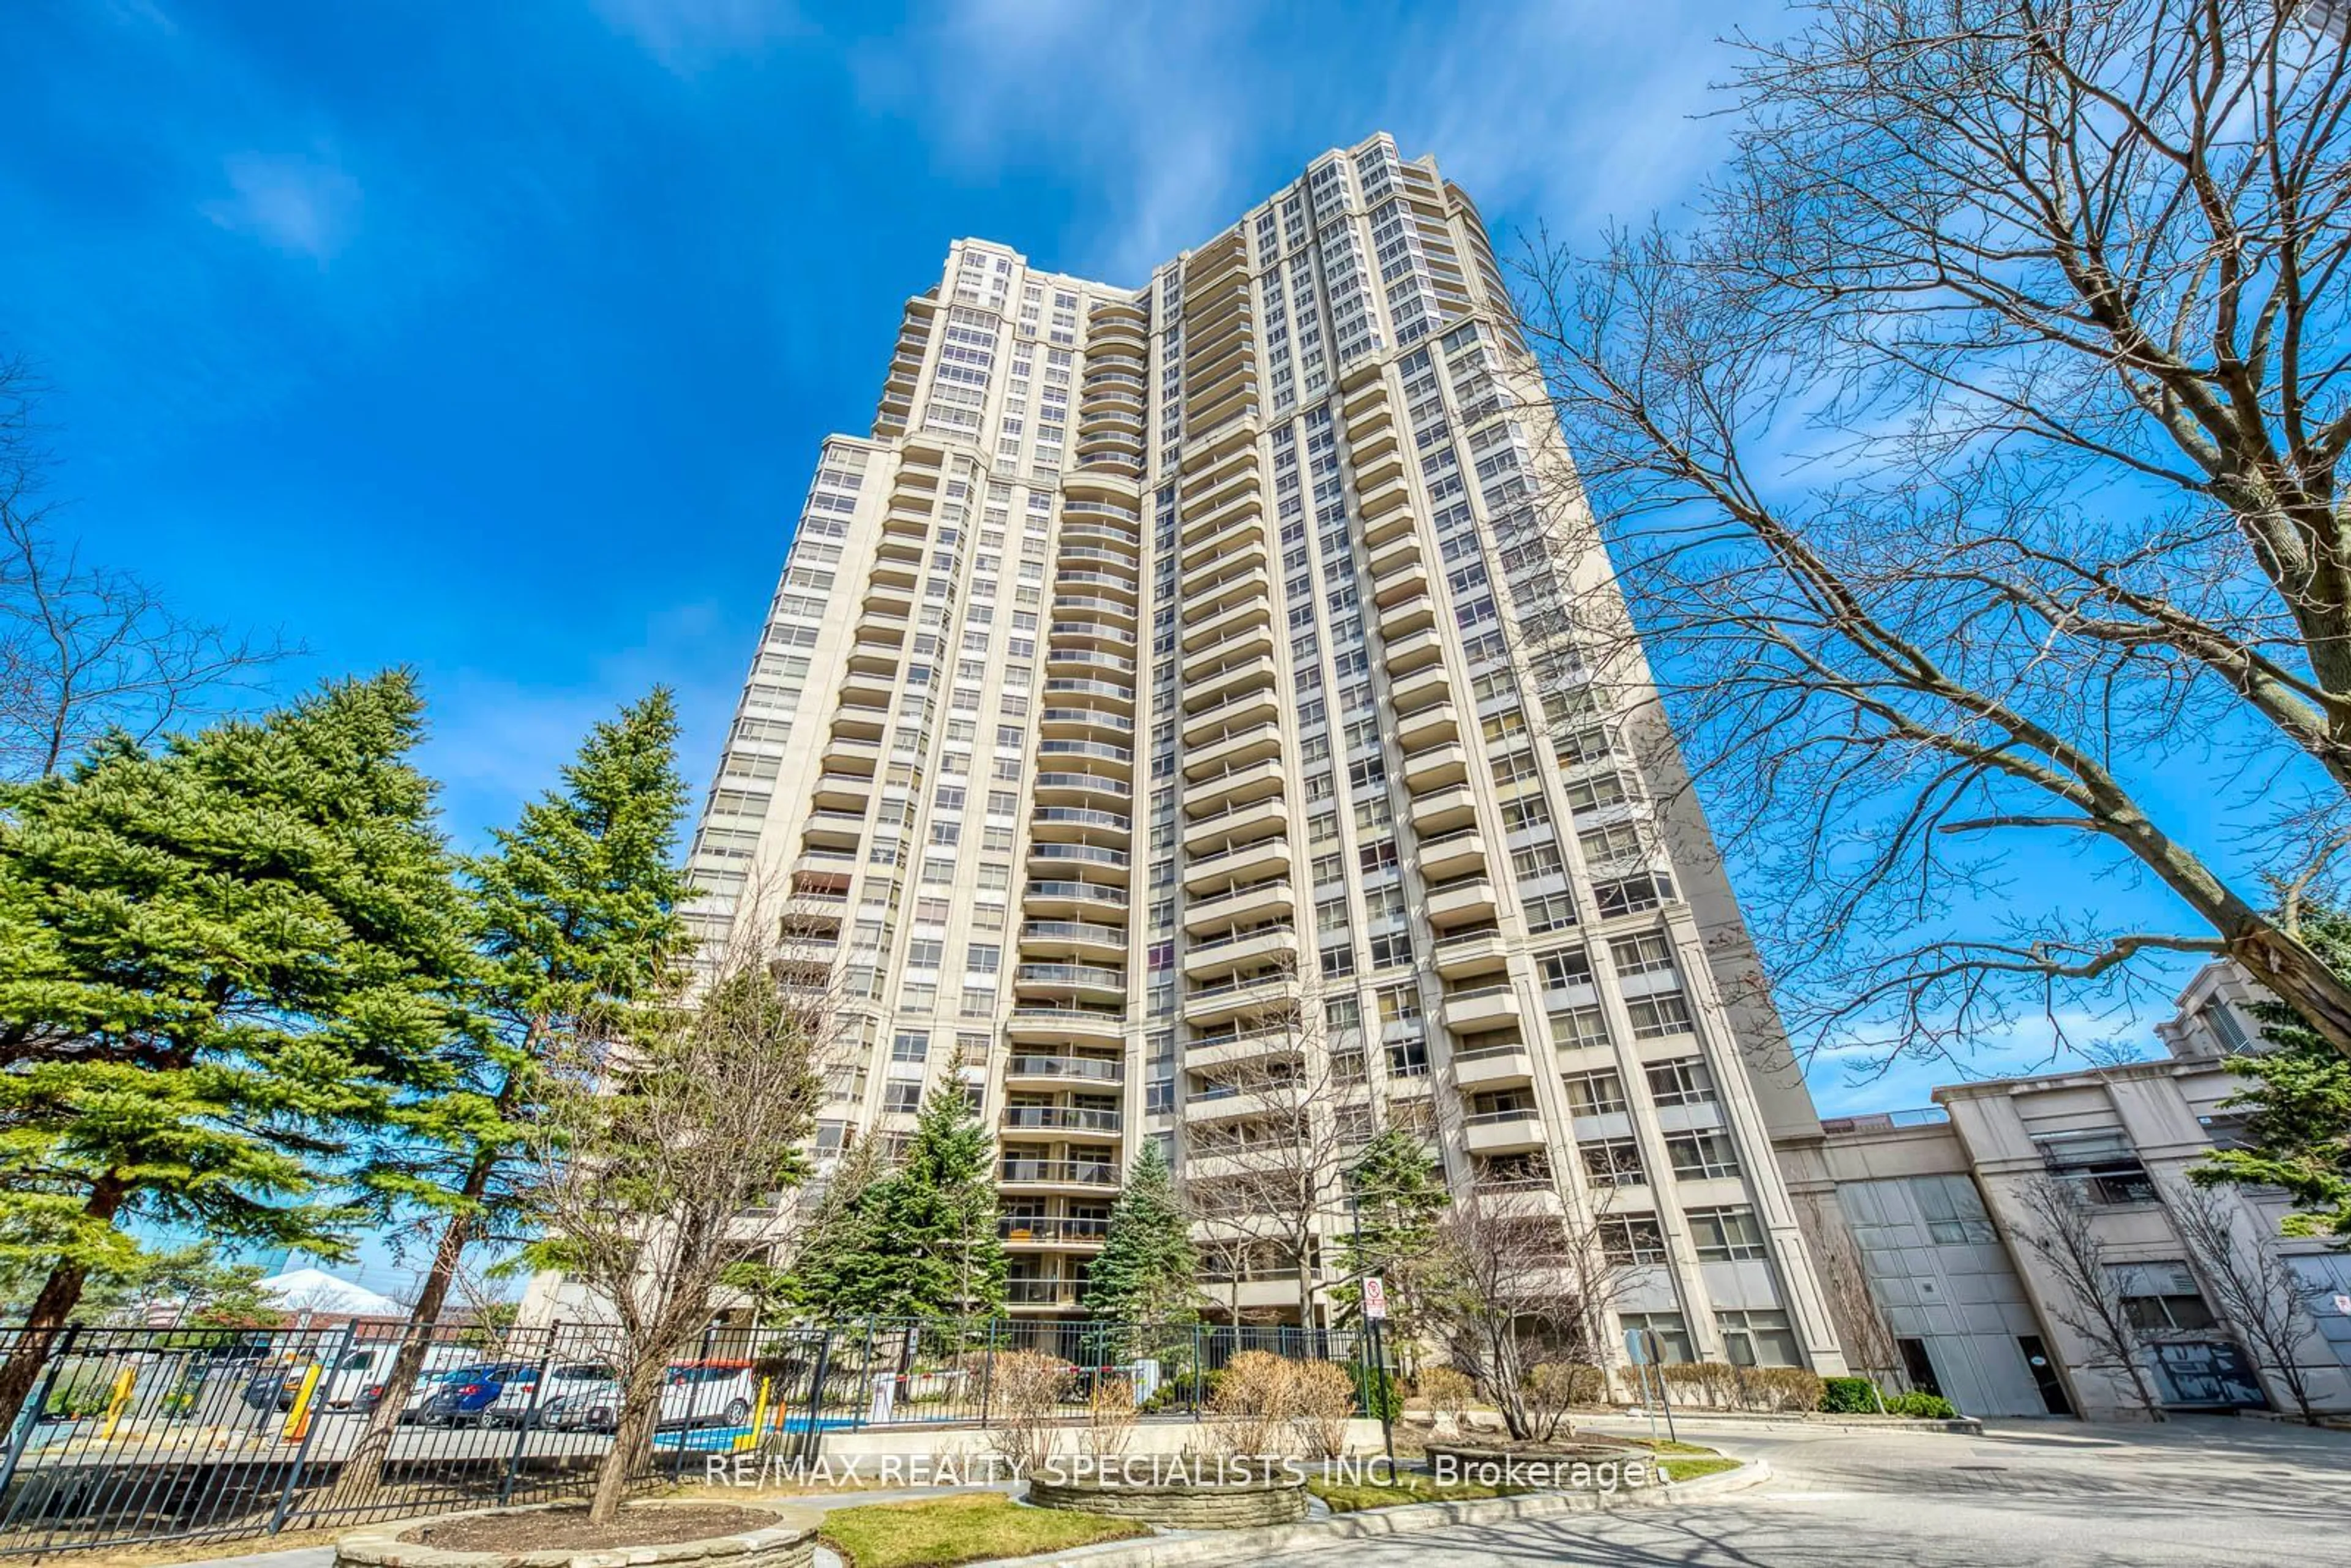 A pic from exterior of the house or condo for 35 Kingsbridge Garden Circ #807, Mississauga Ontario L5R 3Z5